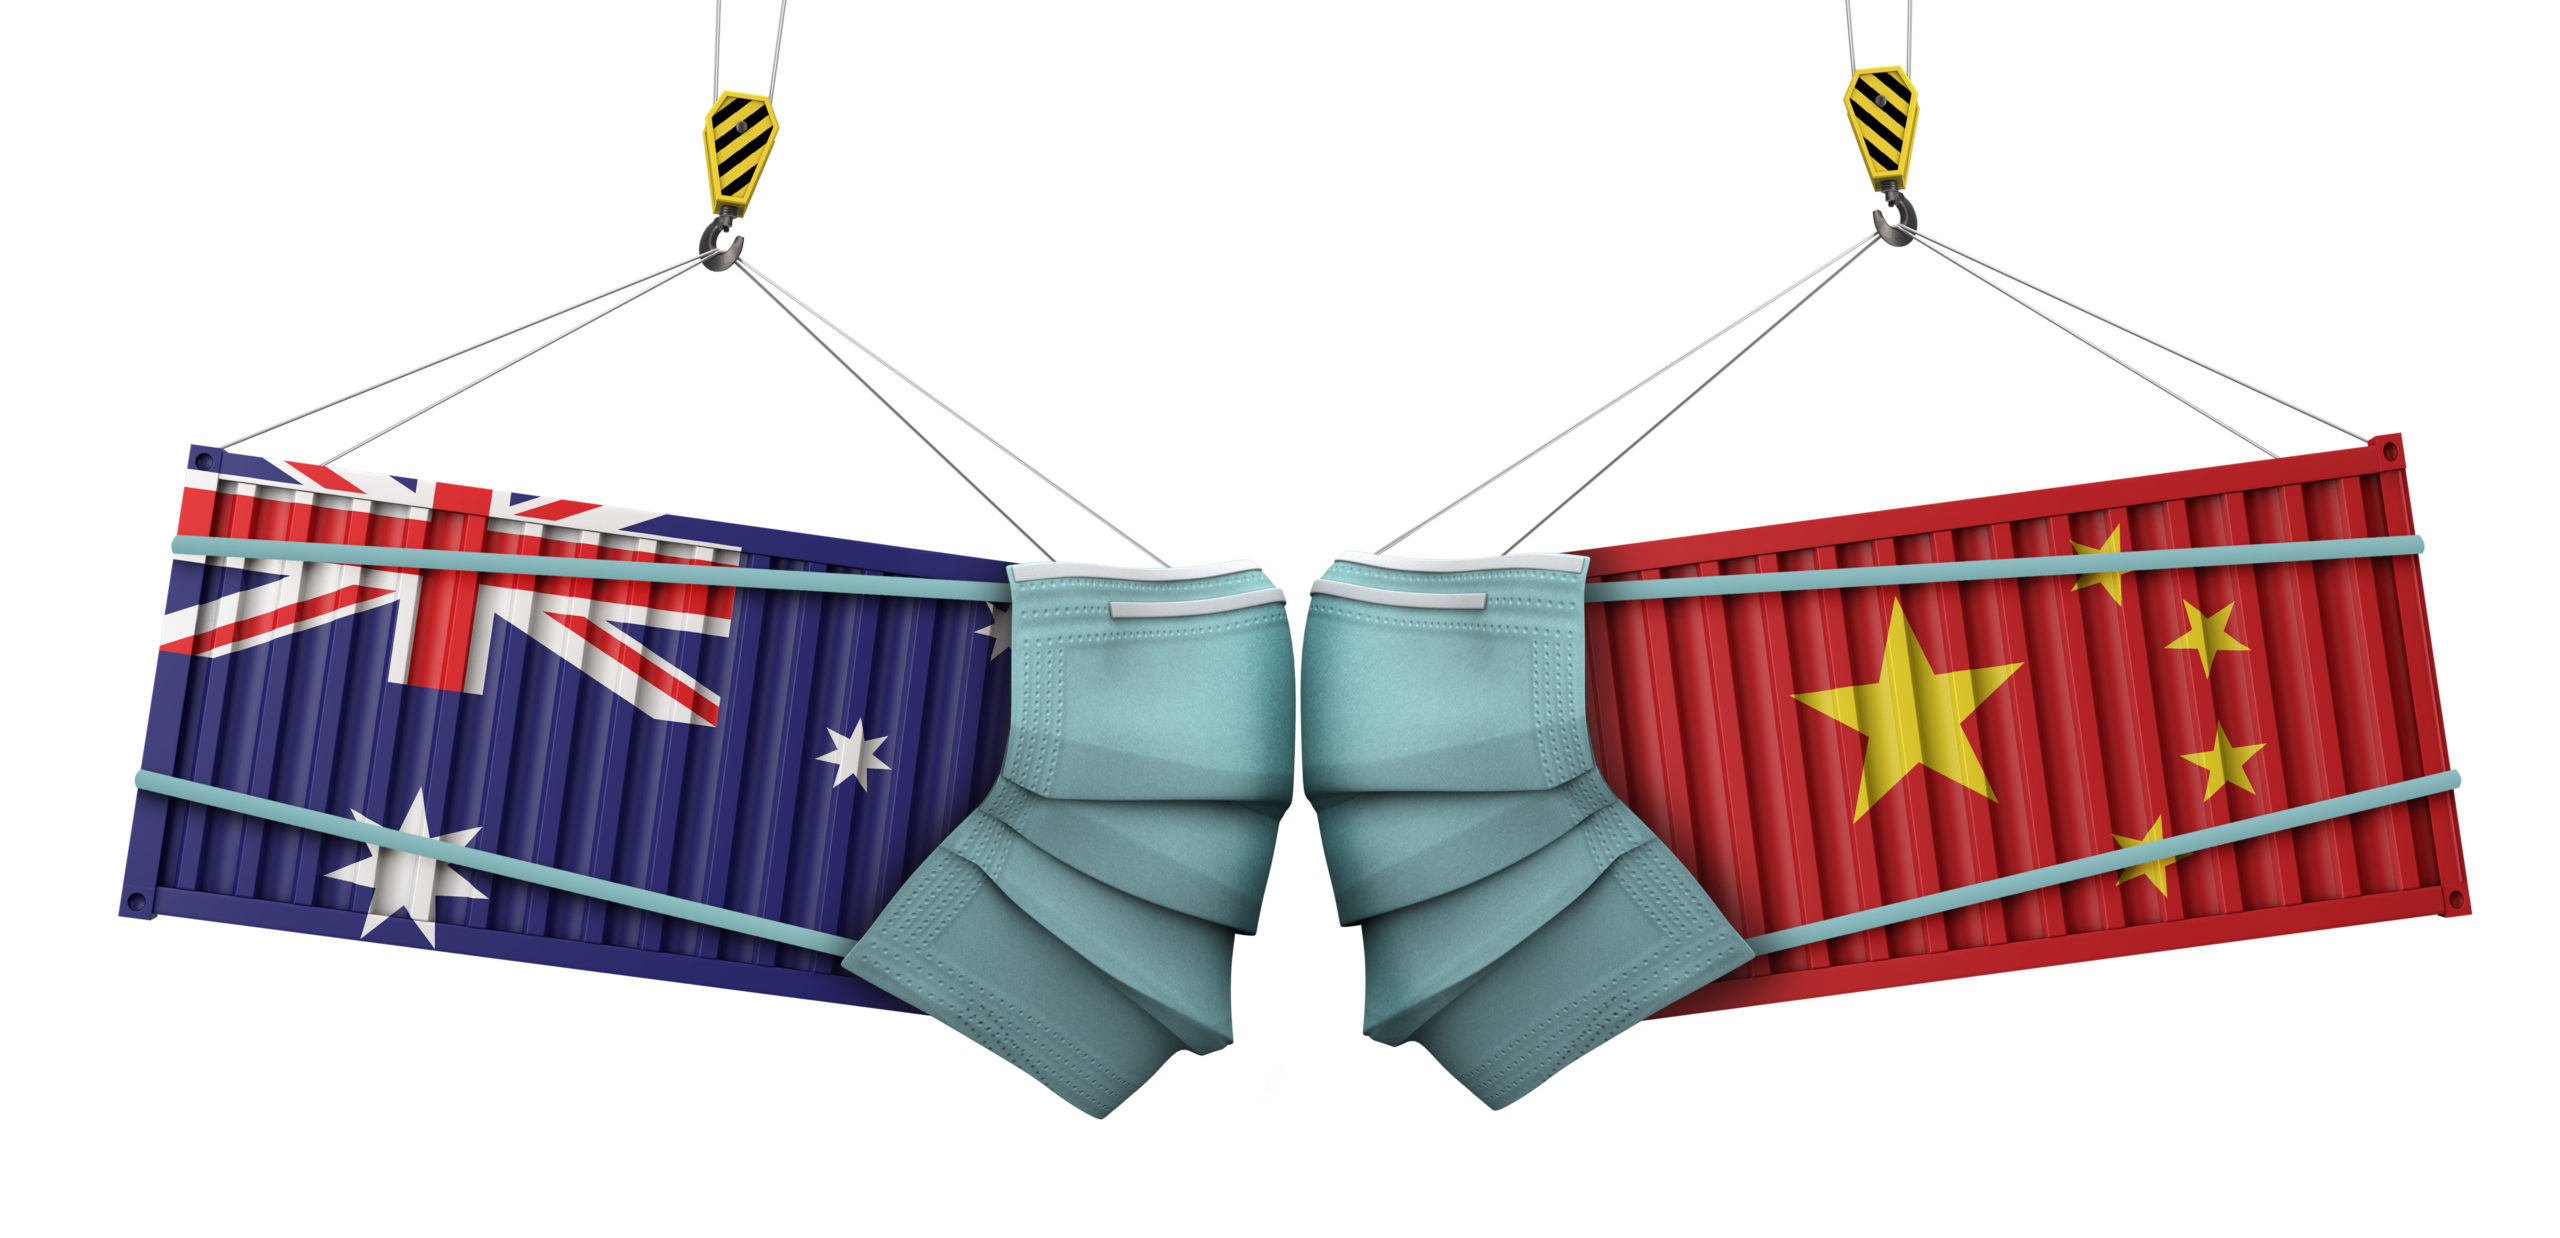 Social Distancing: Australia’s Relations with China